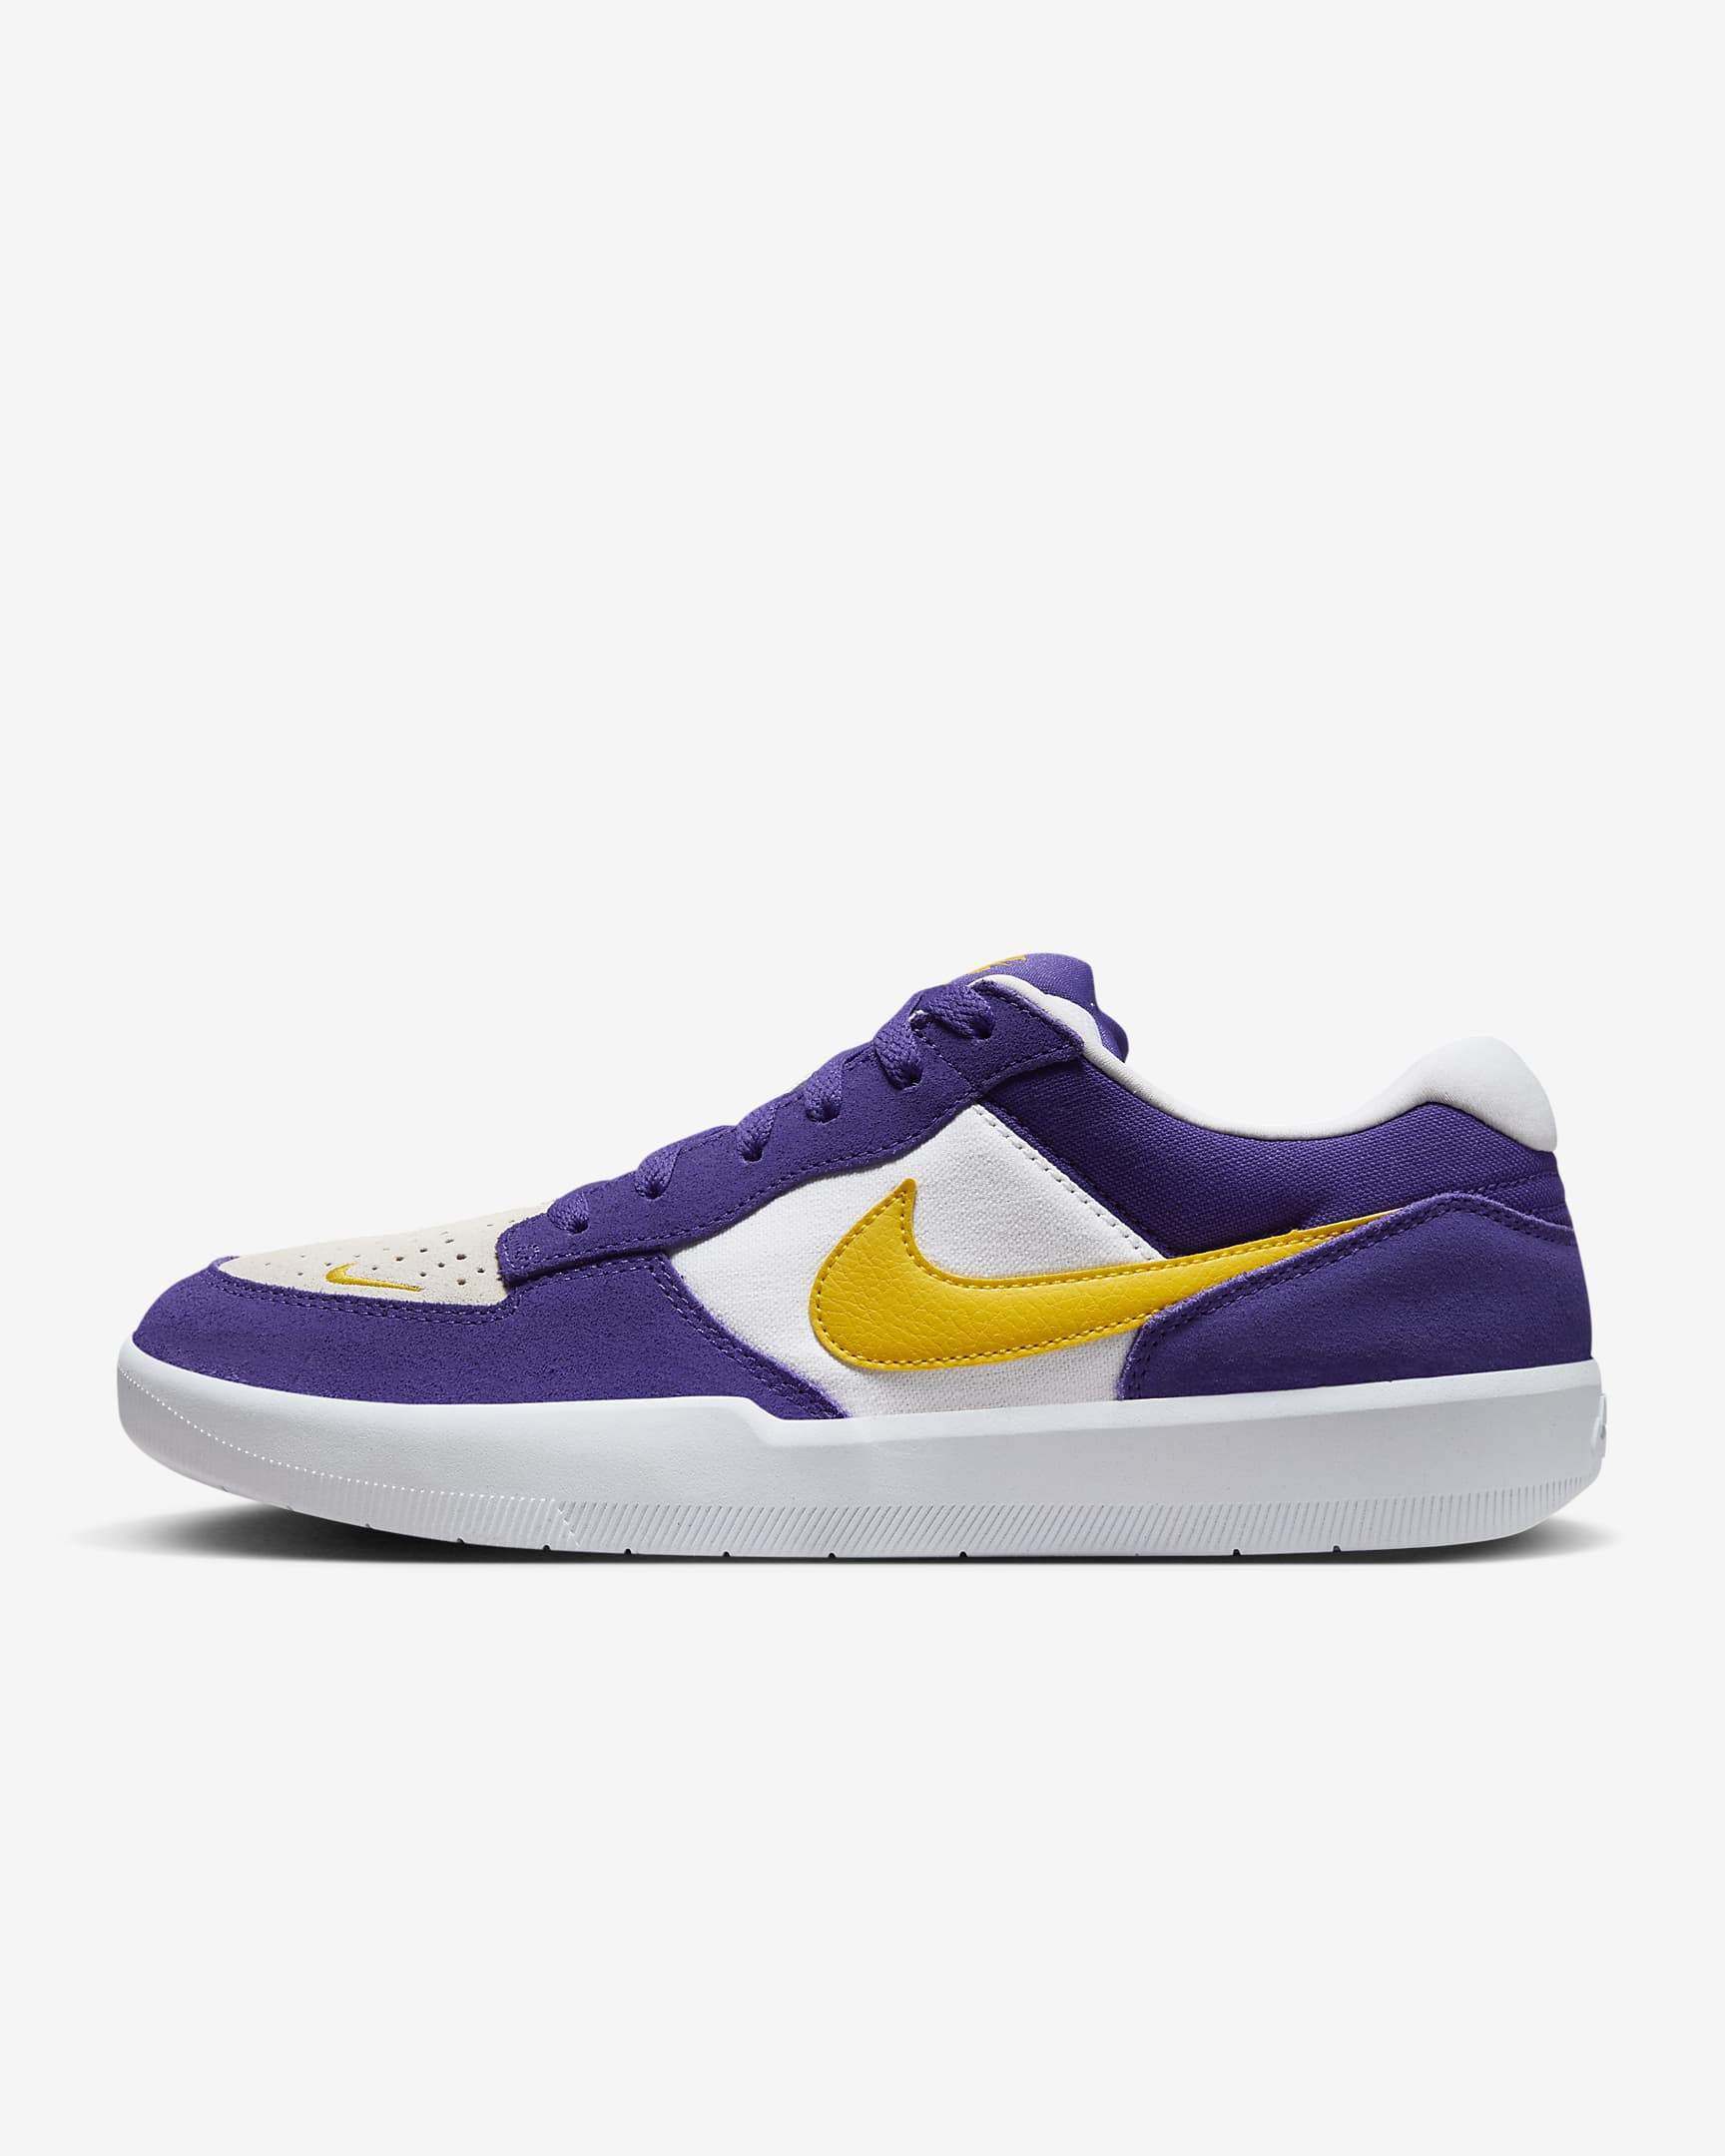 LSU style colorway for Nike SB Force 58 shoes for $45 | Tiger Rant